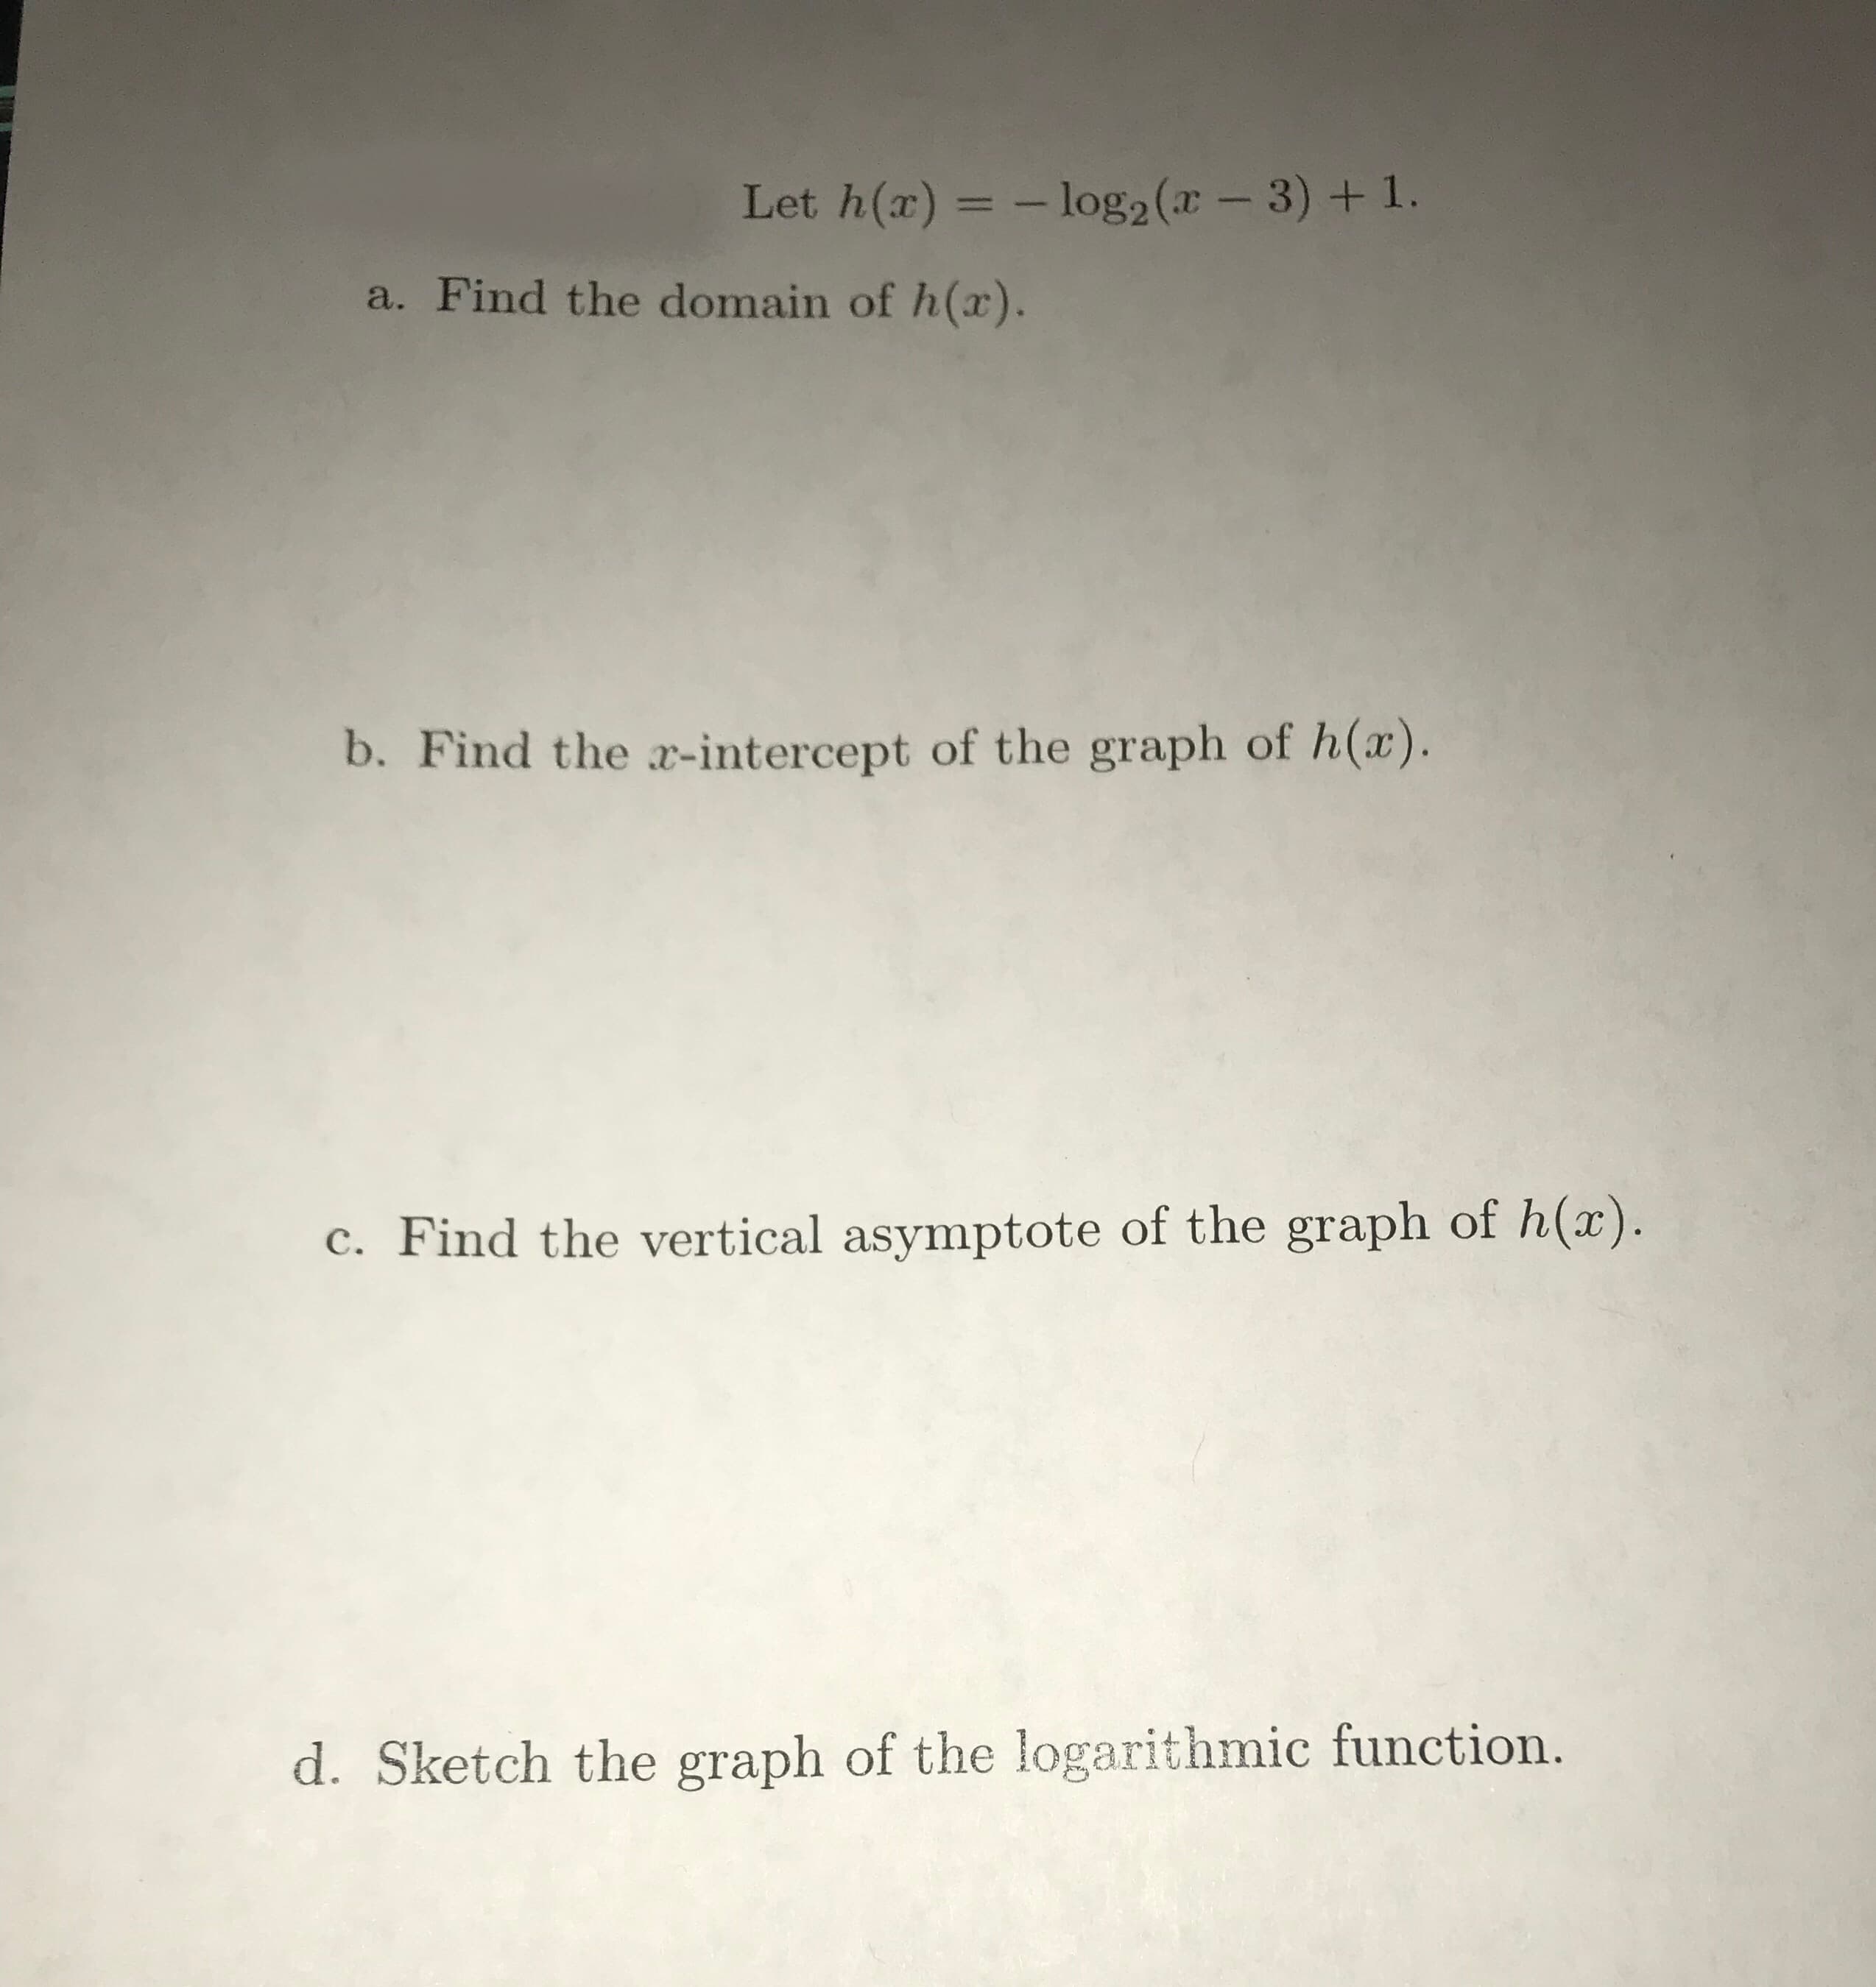 Let h(r) =log2 (x - 3) + 1.
a. Find the domain of h(x).
b. Find the a-intercept of the graph of h(x)
Find the vertical asymptote of the graph of h(x).
d. Sketch the graph of the logarithmic function.
